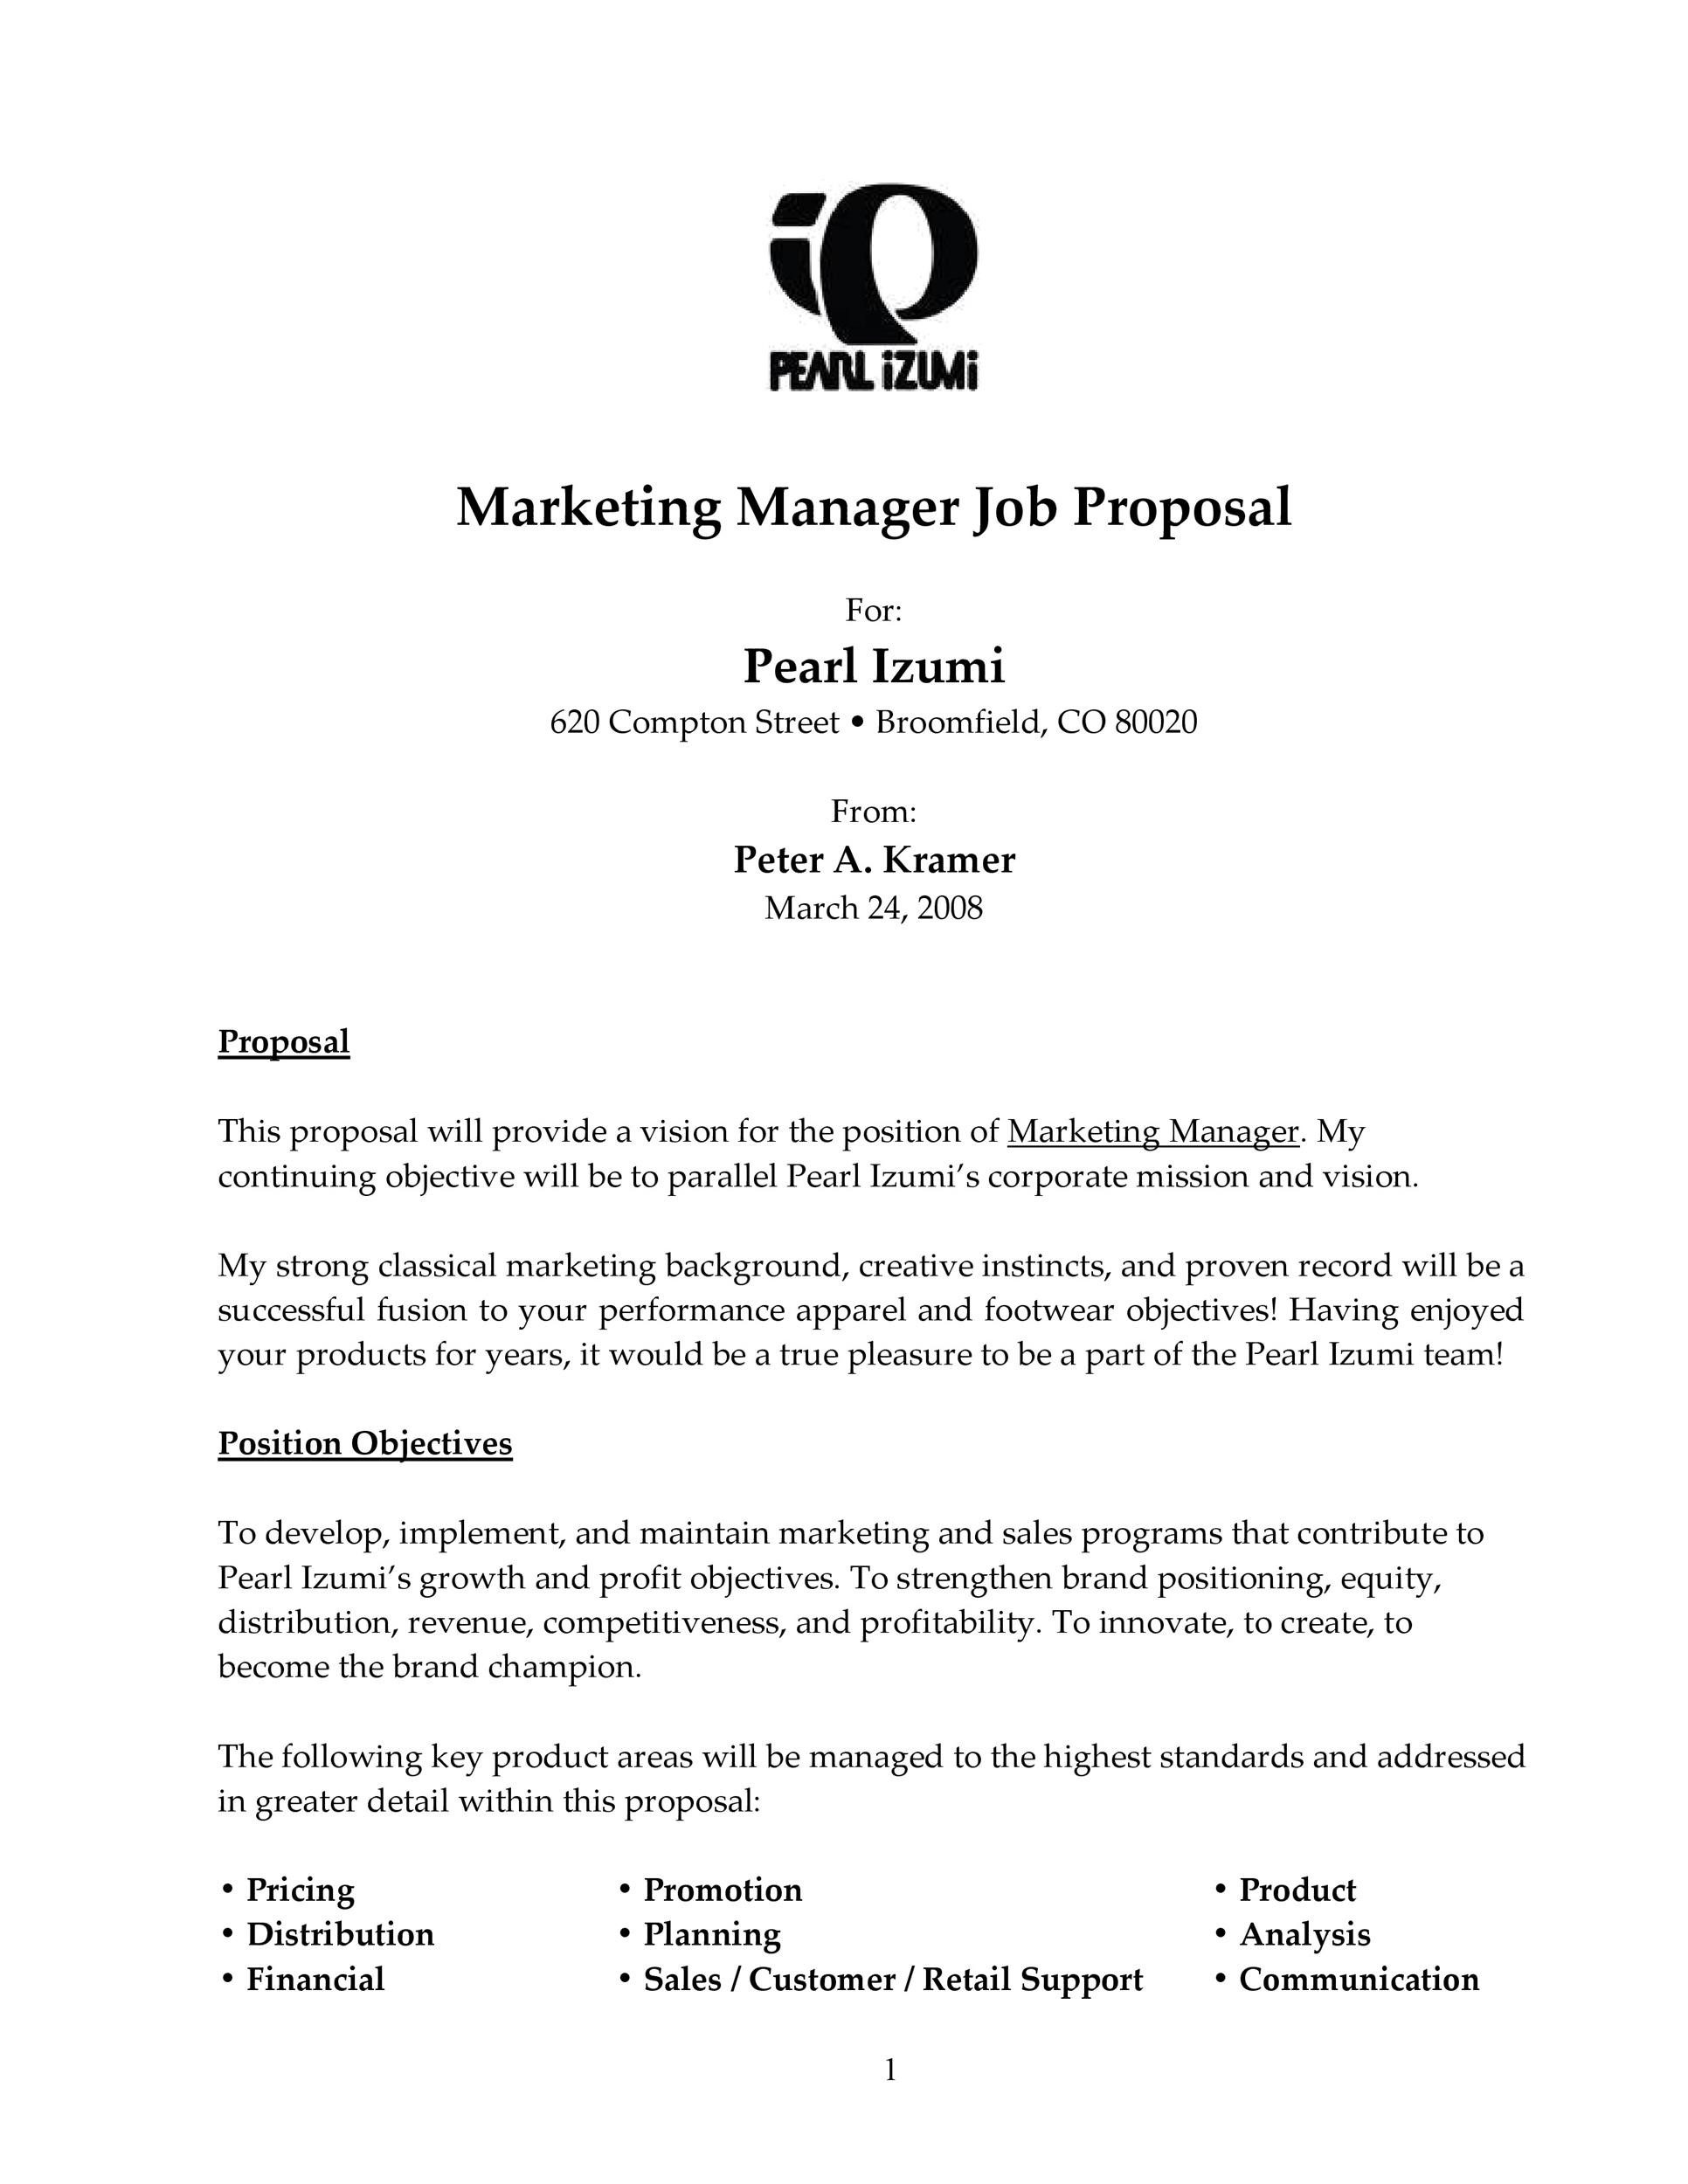 New Job Proposal Template - Free Resume Templates Throughout New Position Proposal Template